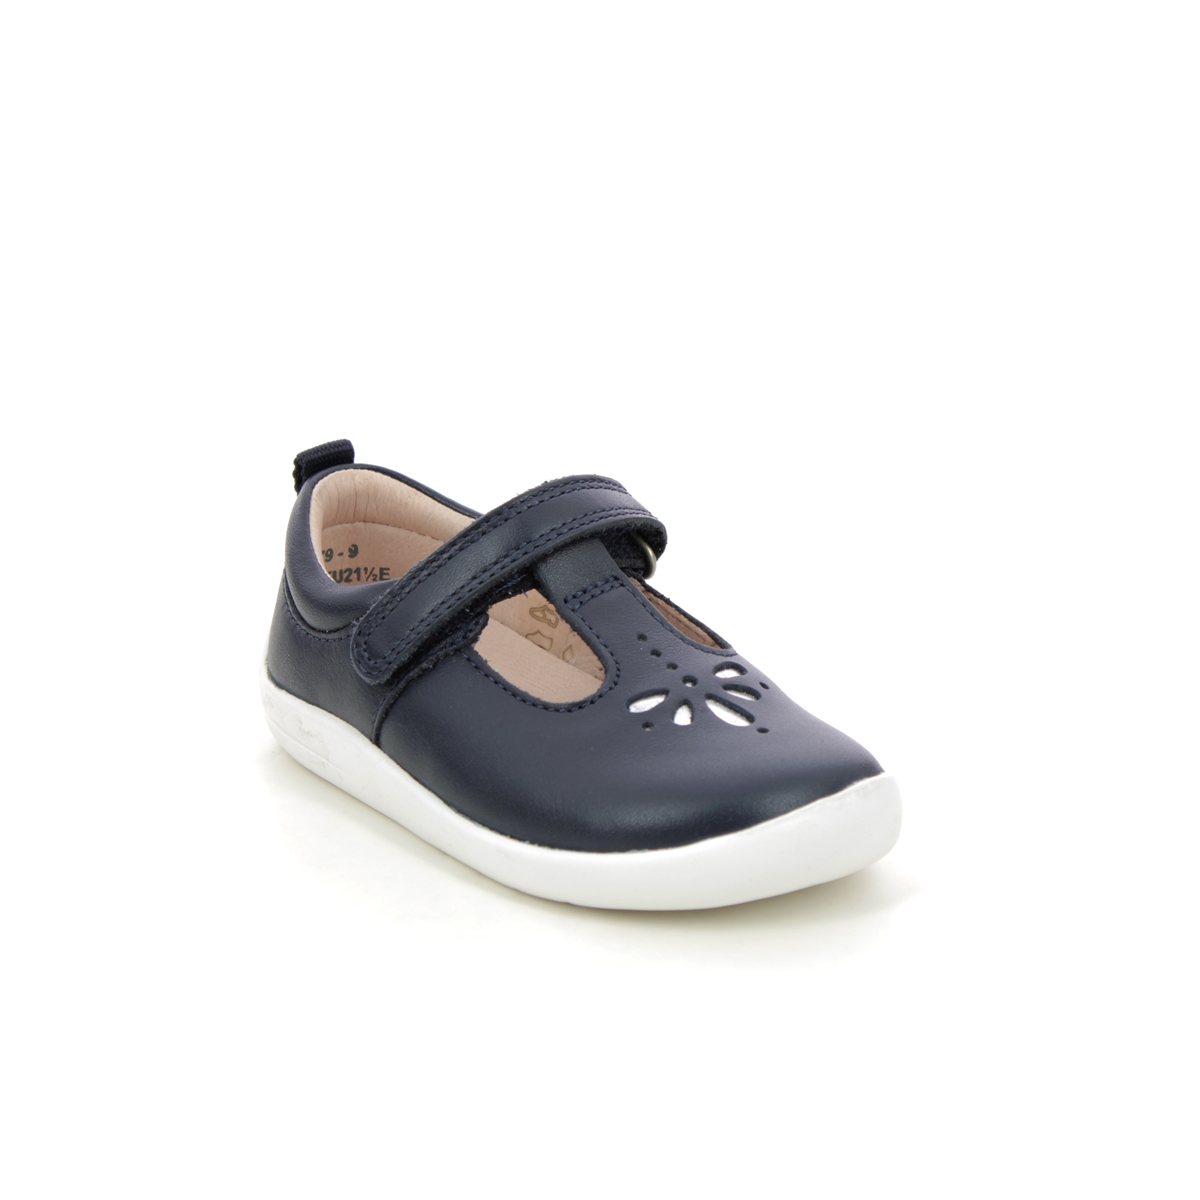 Start Rite - Puzzle In Navy Leather 0779-95E In Size 4.5 In Plain Navy Leather 1St Shoes & Prewalkers  In Navy Leather